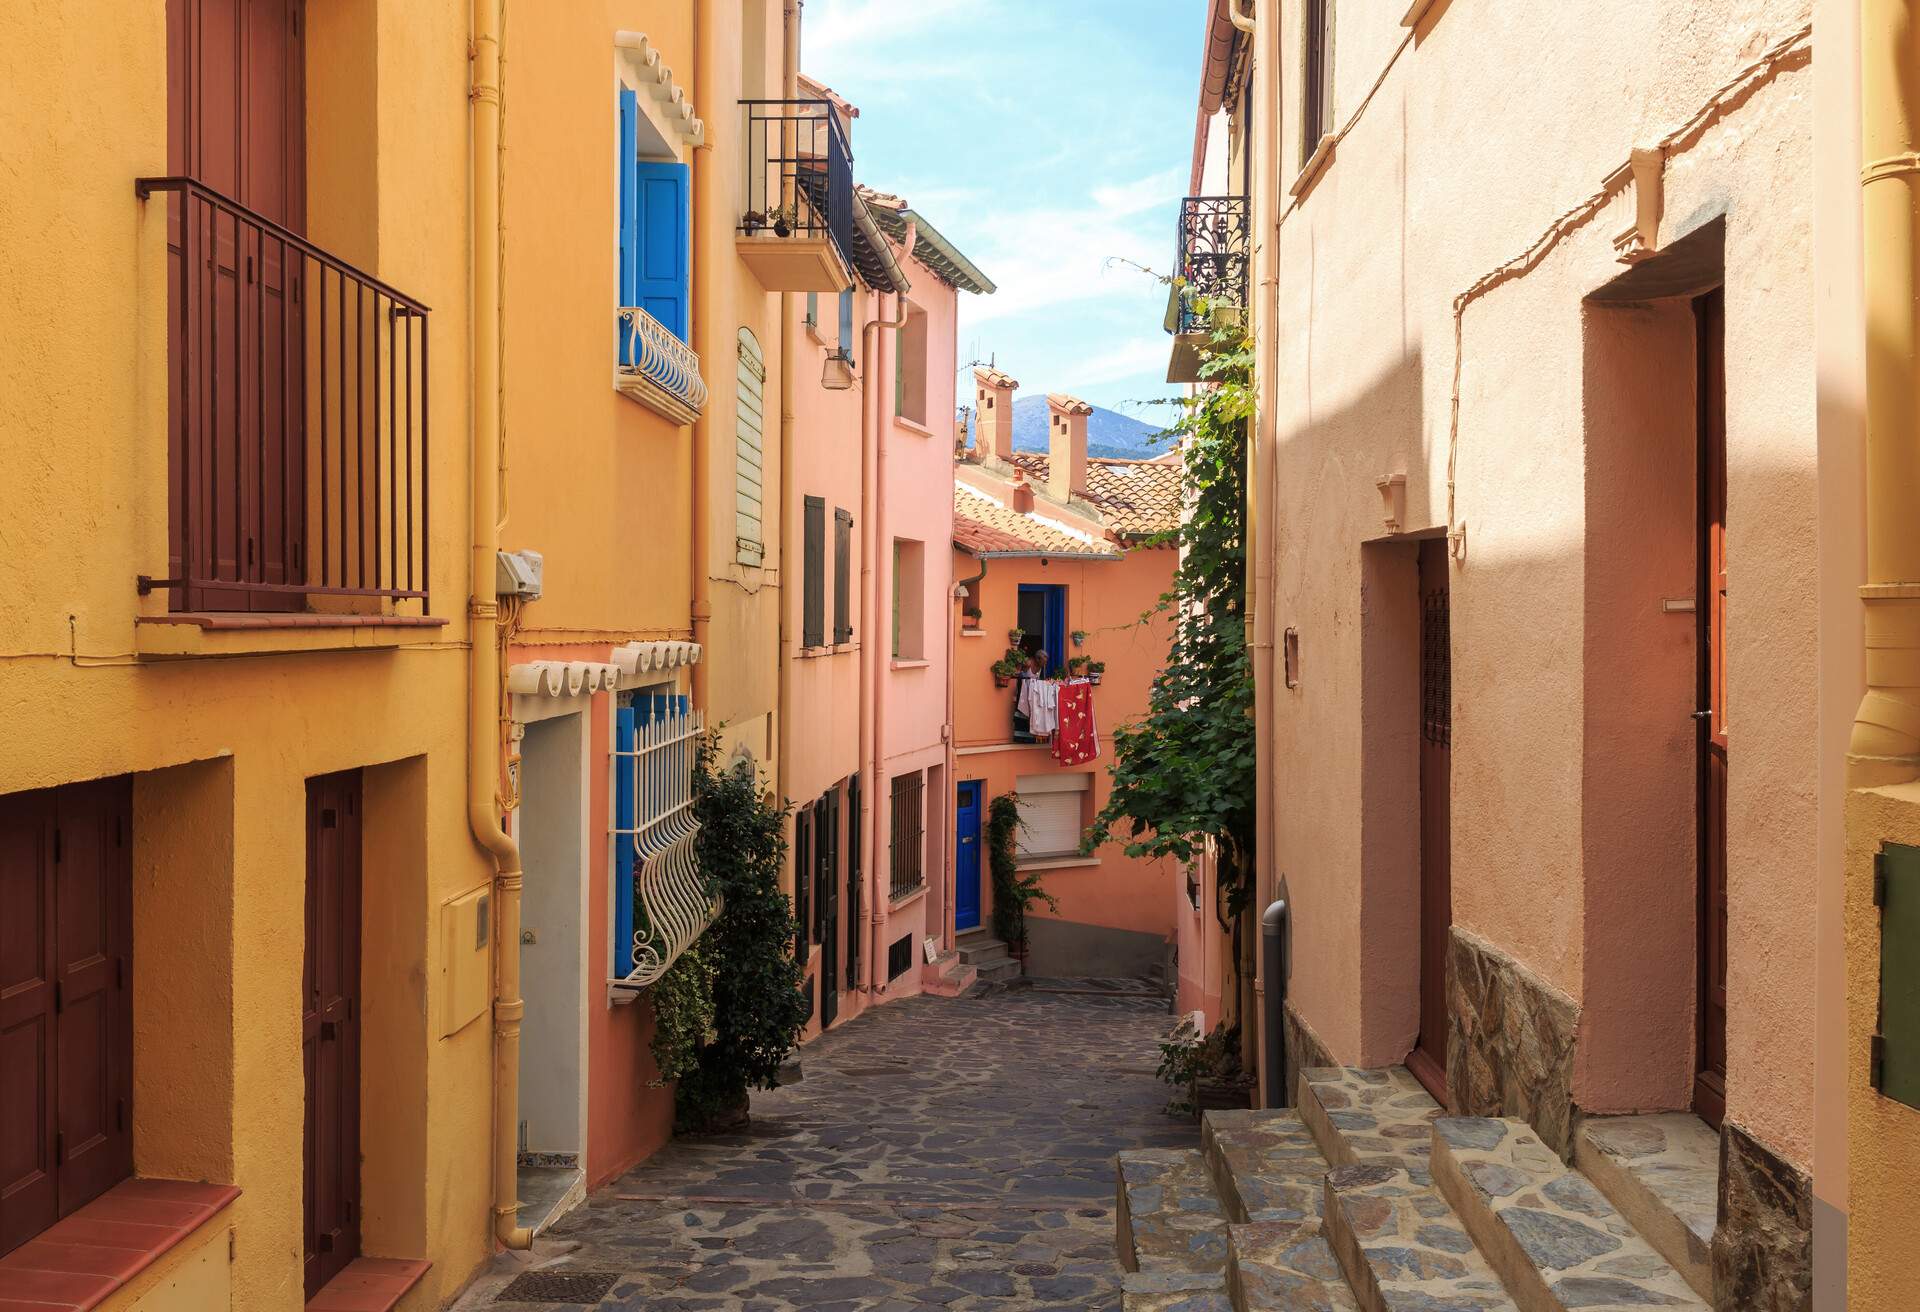 Typical street in the south of France (Collioure / Languedoc-Roussillon, France)